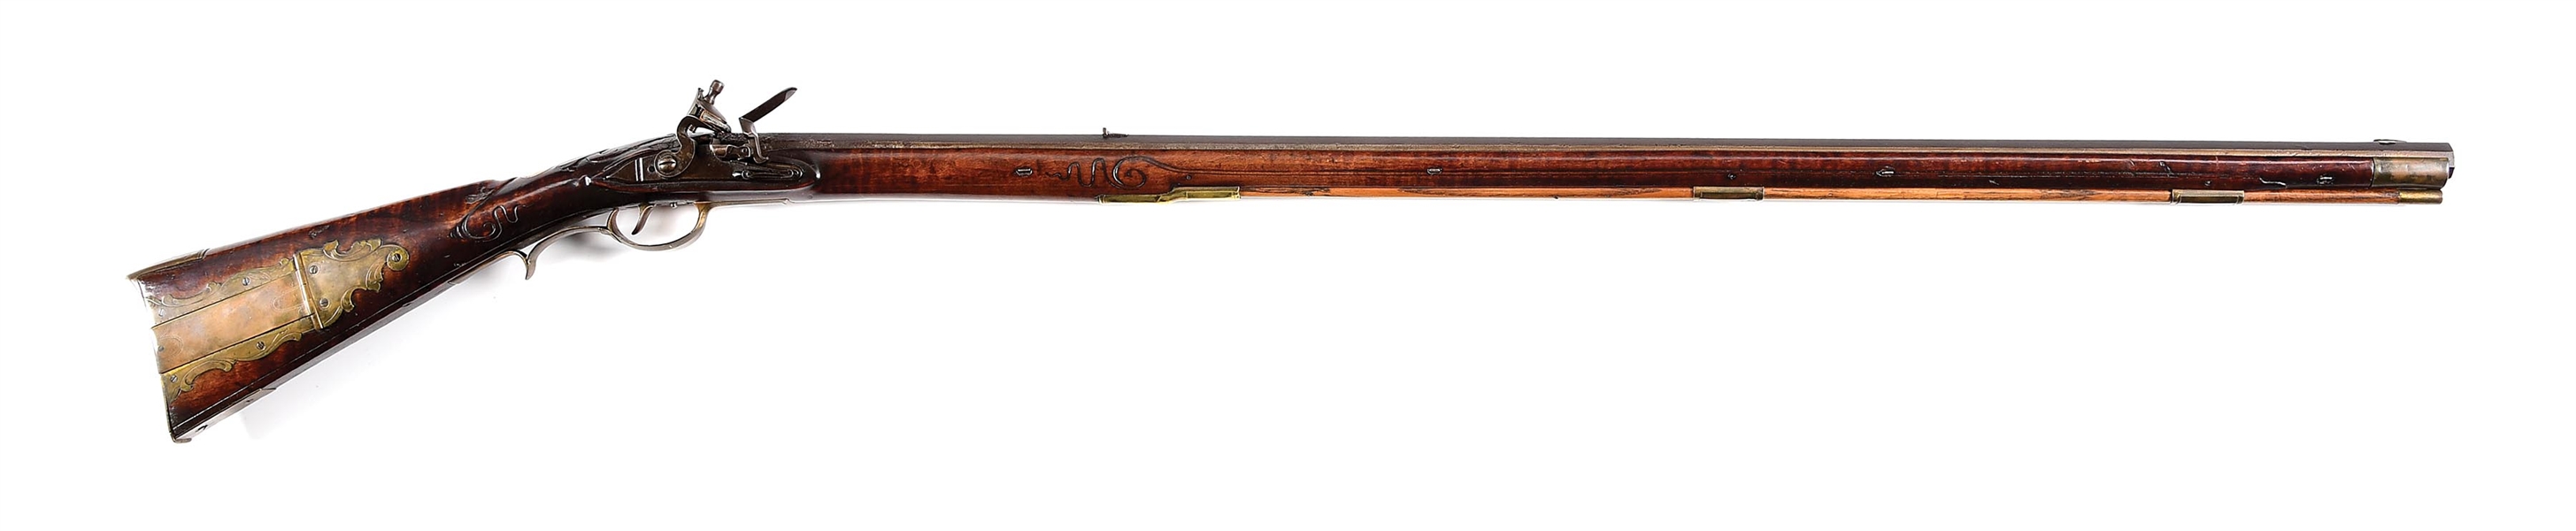 (A) FINE RAISED CARVED FLINTLOCK KENTUCKY RIFLE ATTRIBUTED TO JACOB METZGER.